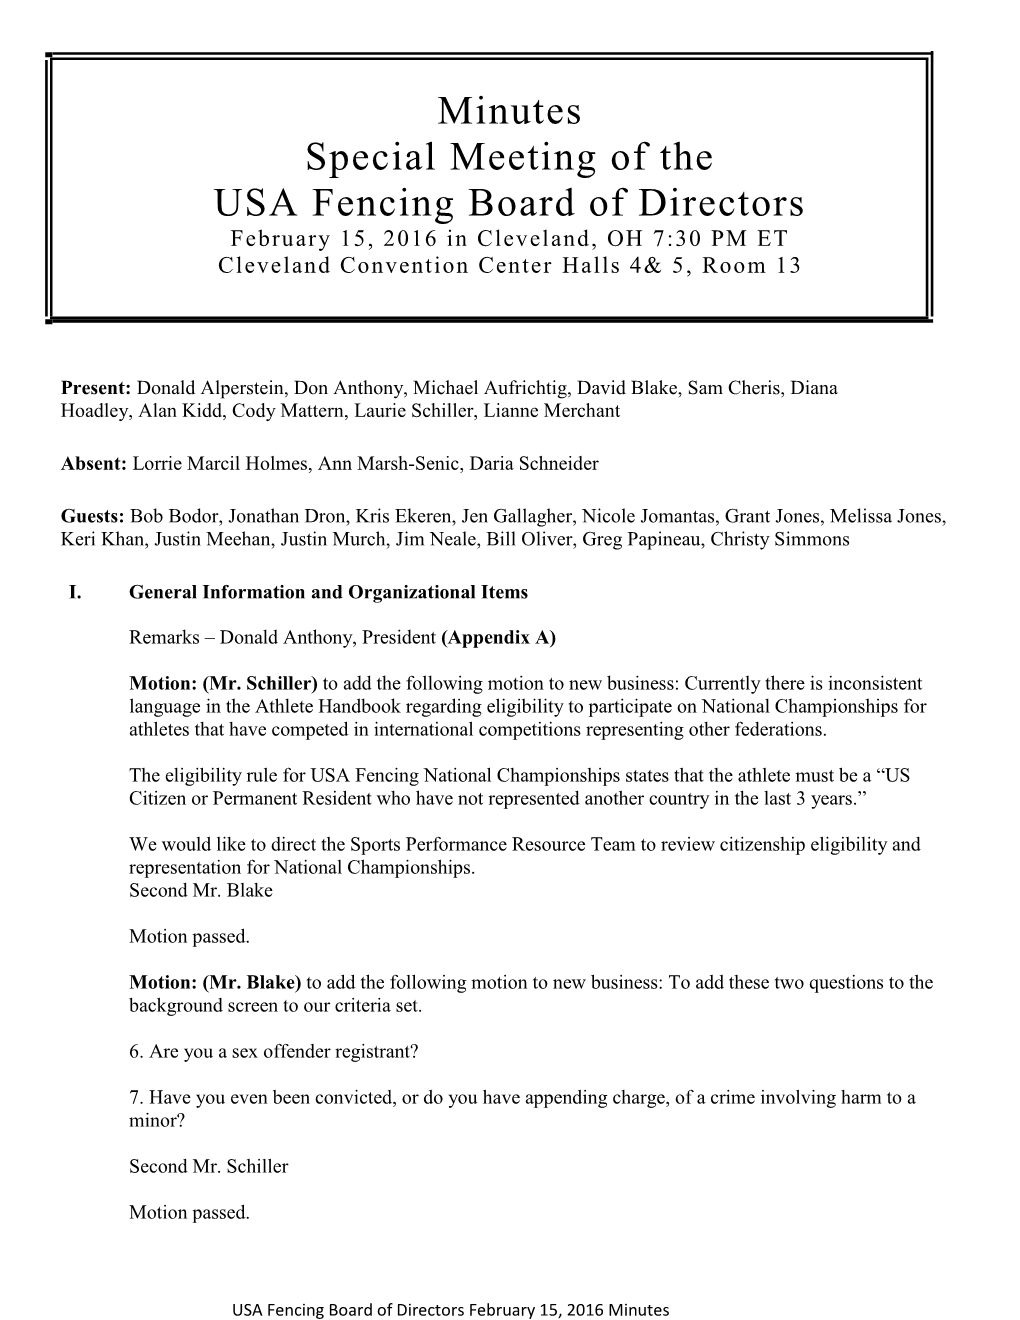 Minutes Special Meeting of the USA Fencing Board of Directors February 15, 2016 in Cleveland, OH 7:30 PM ET Cleveland Convention Center Halls 4& 5, Room 13